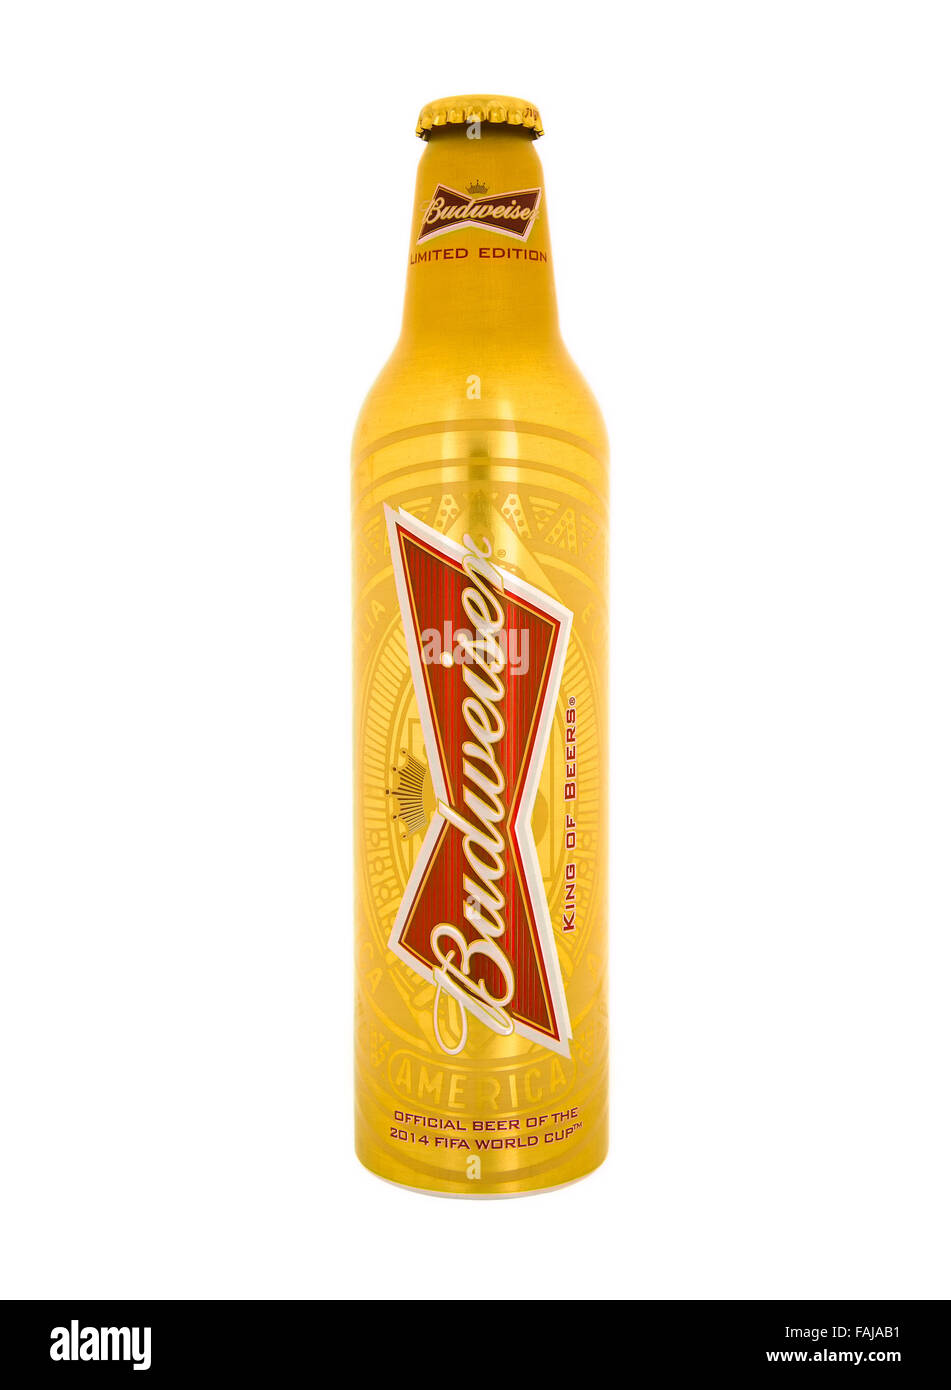 Bottle of Limited Edition Budweiser beer made for the 2014 FIFA Football World Cup on a white background. Stock Photo